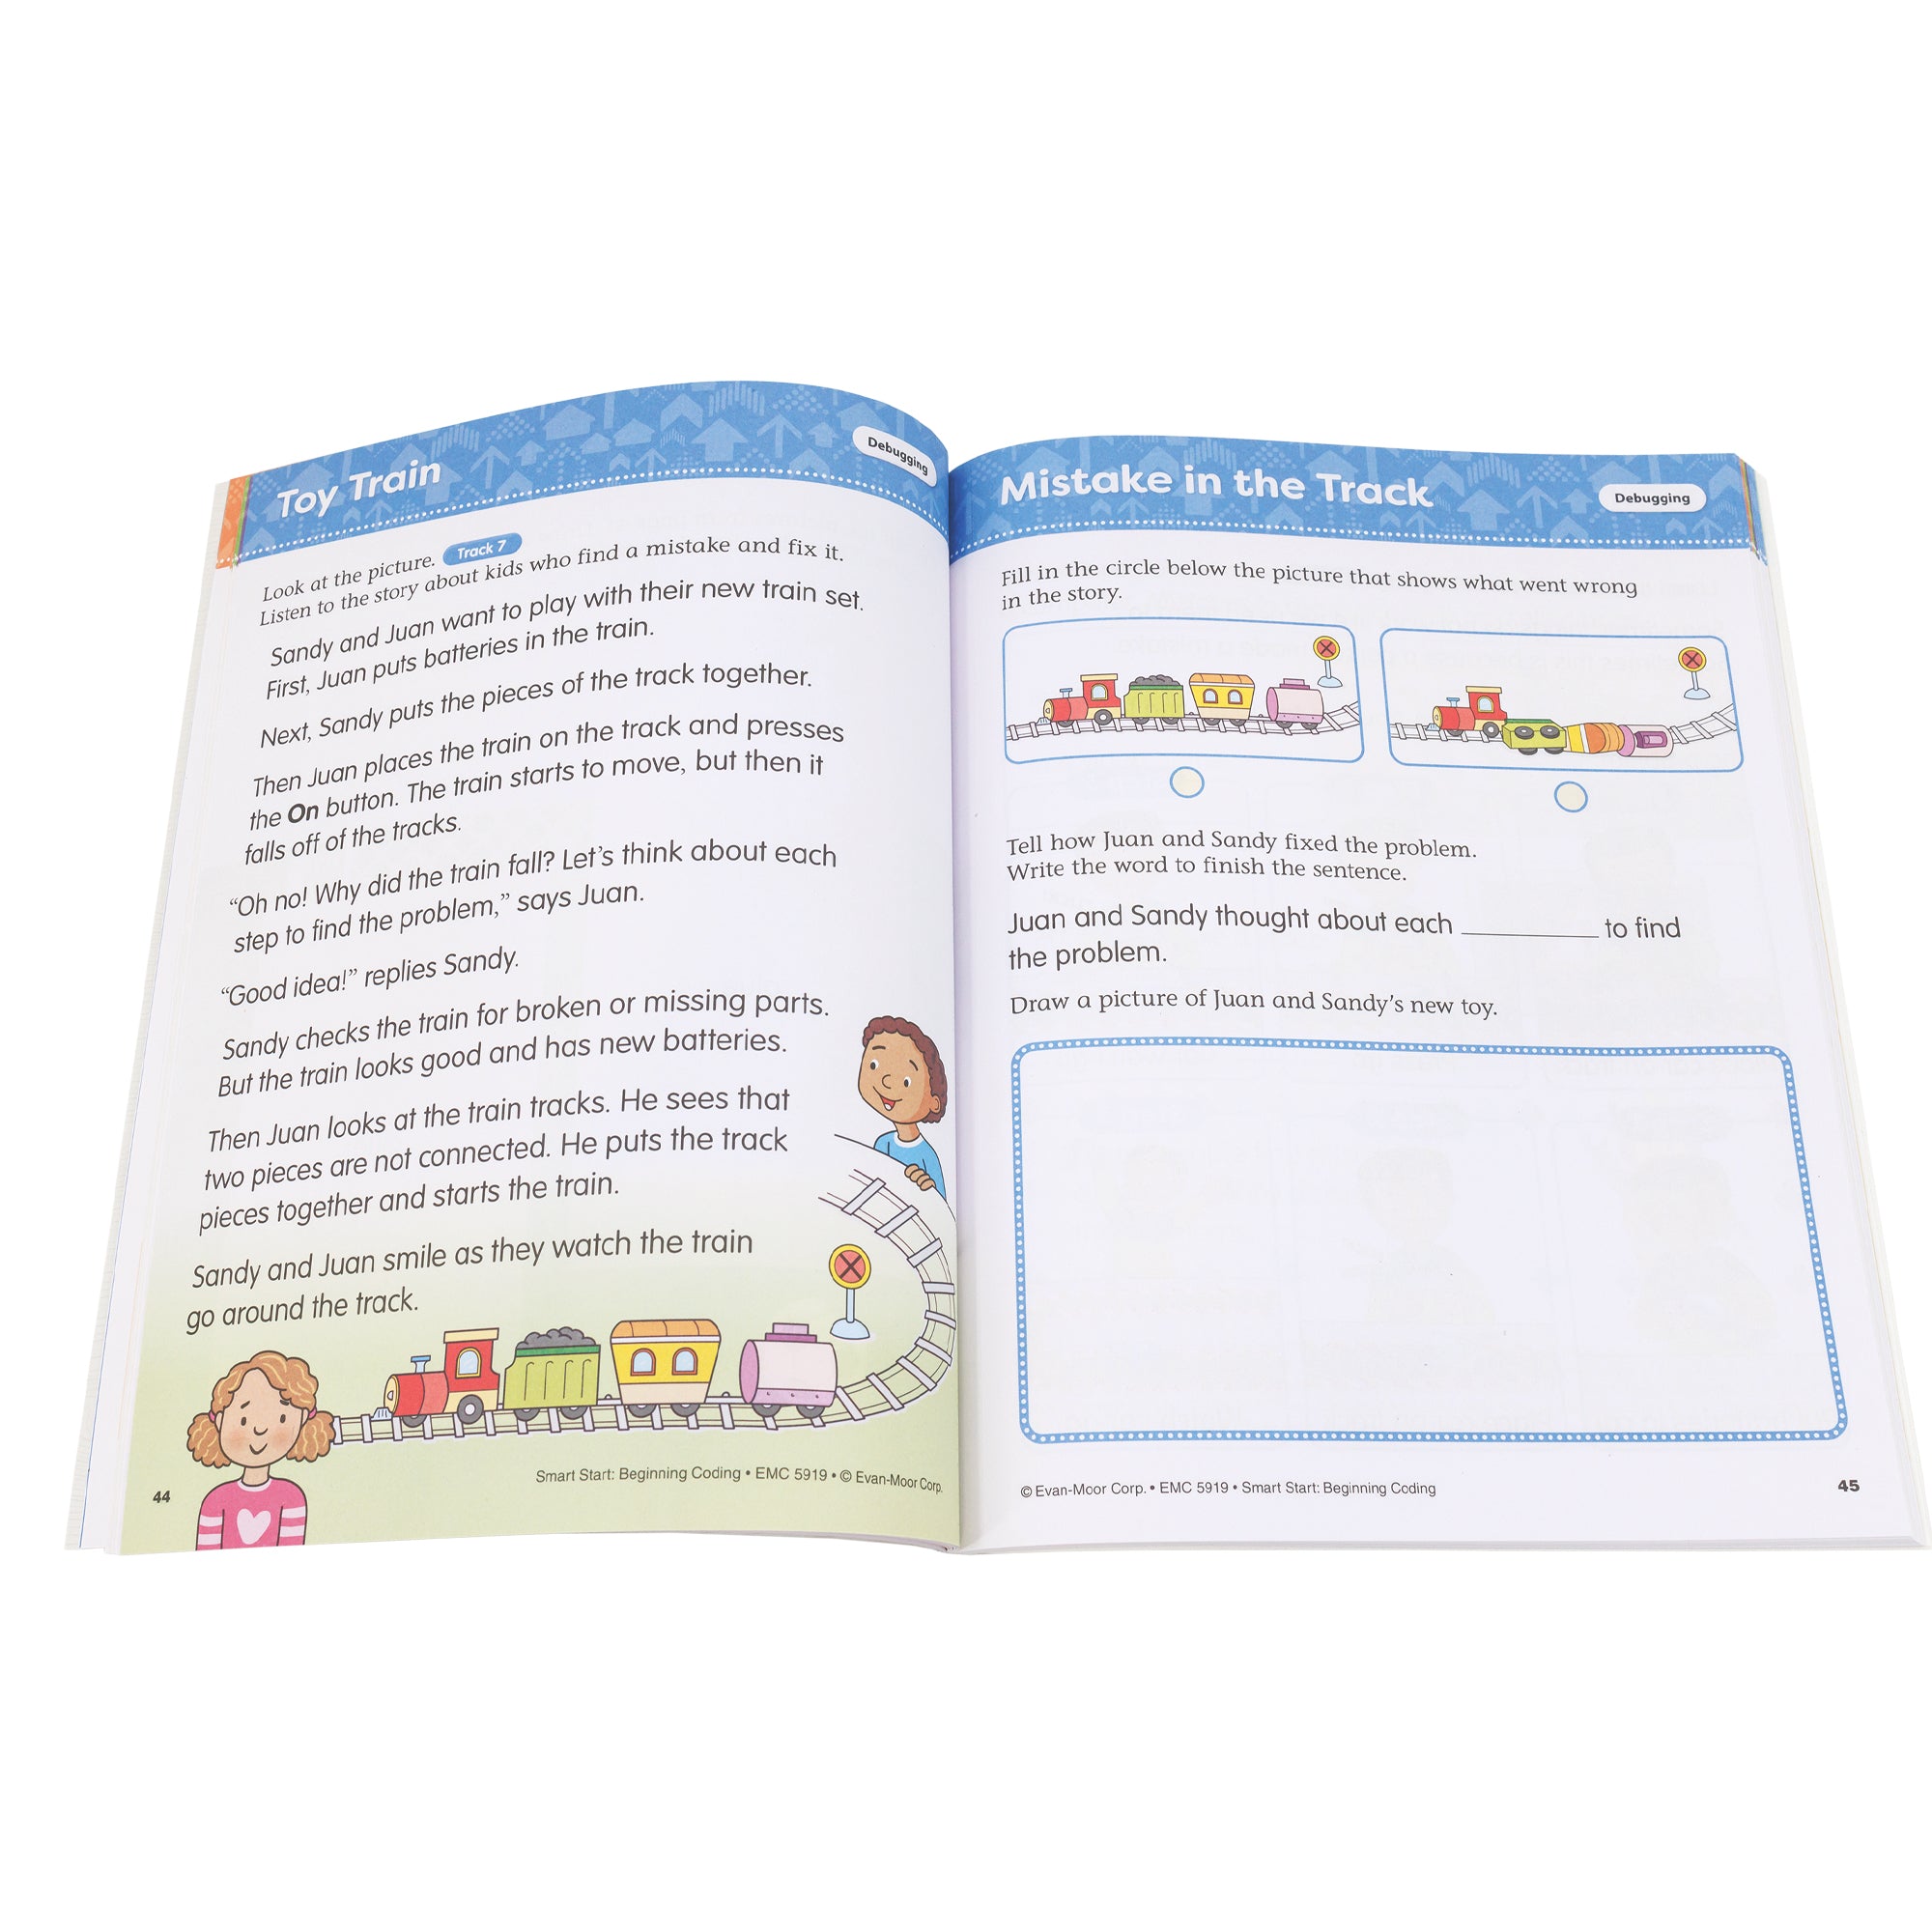 Smart Start Beginning Coding book open to show inside pages. The white pages have a blue top border with titles inside. The left page, titled “Toy Train,” shows an illustration of a girl and a boy playing with a toy train. There is a story about the 2 children putting a train together, finding a problem, and fixing it. The right page, titled “Mistake in the Track,” has you discuss portions of the train story and indicated the picture associated with the train story.